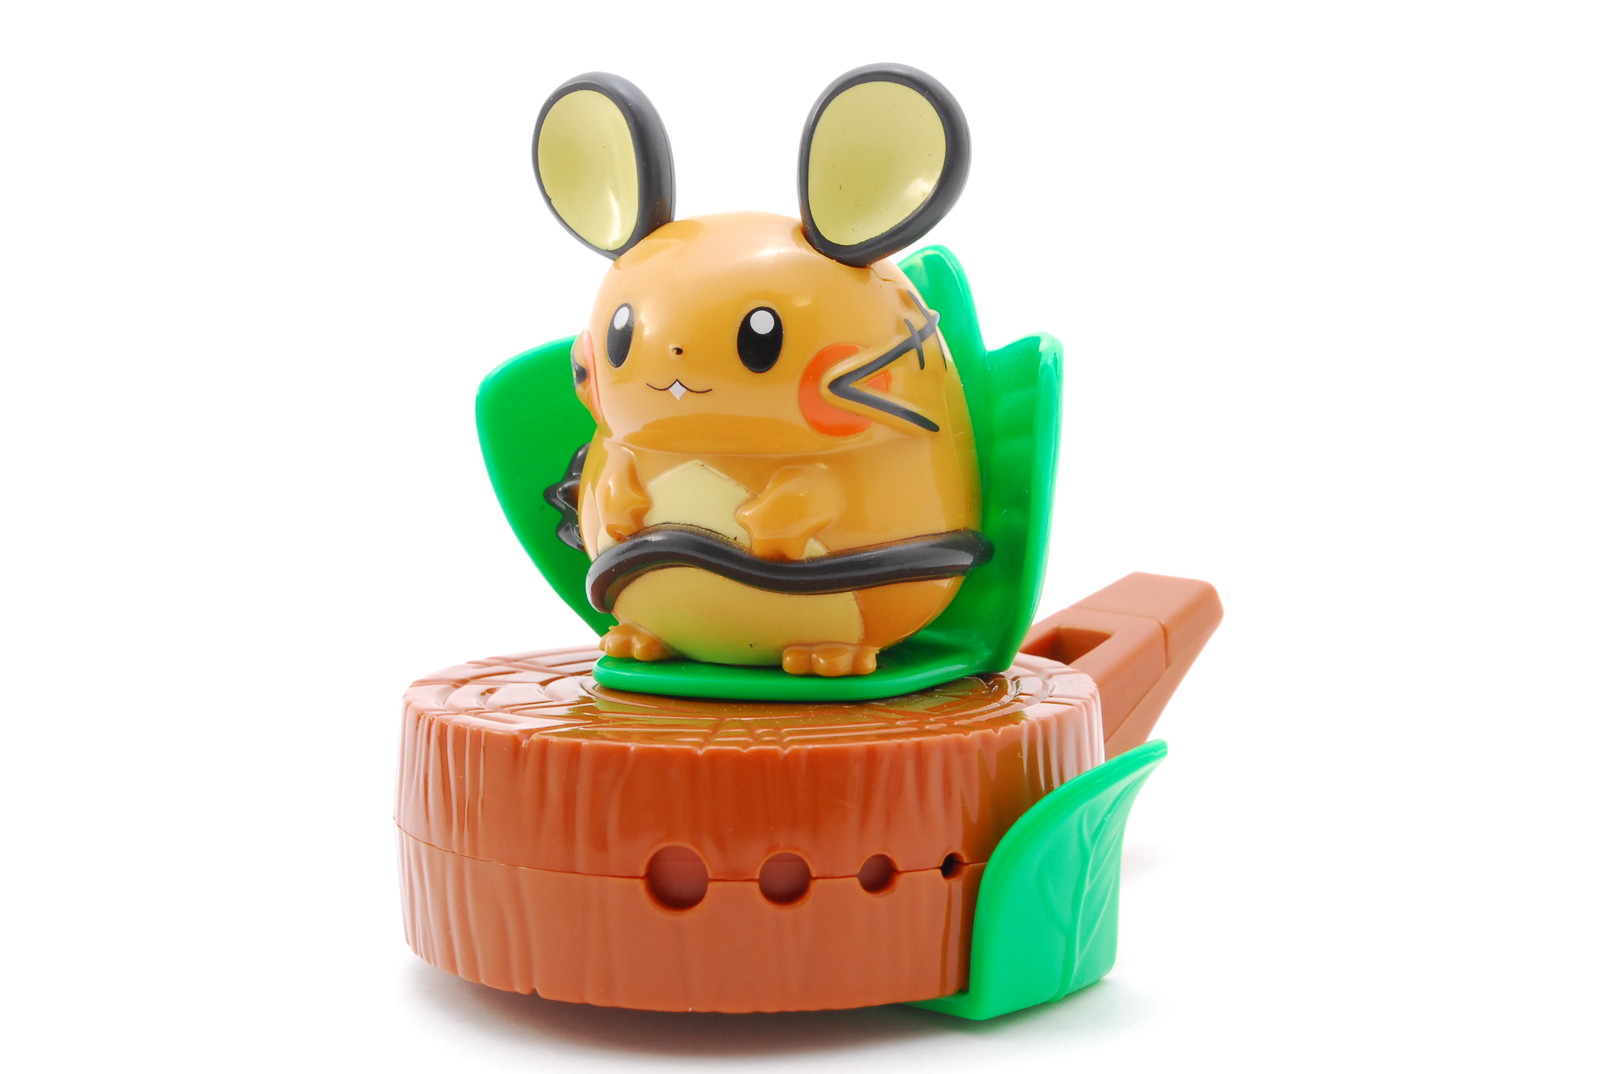 PROMOTION. MINT POKEMON DEDENNE Whistle Type Figure Made in 2014 Novelty Product from Japan